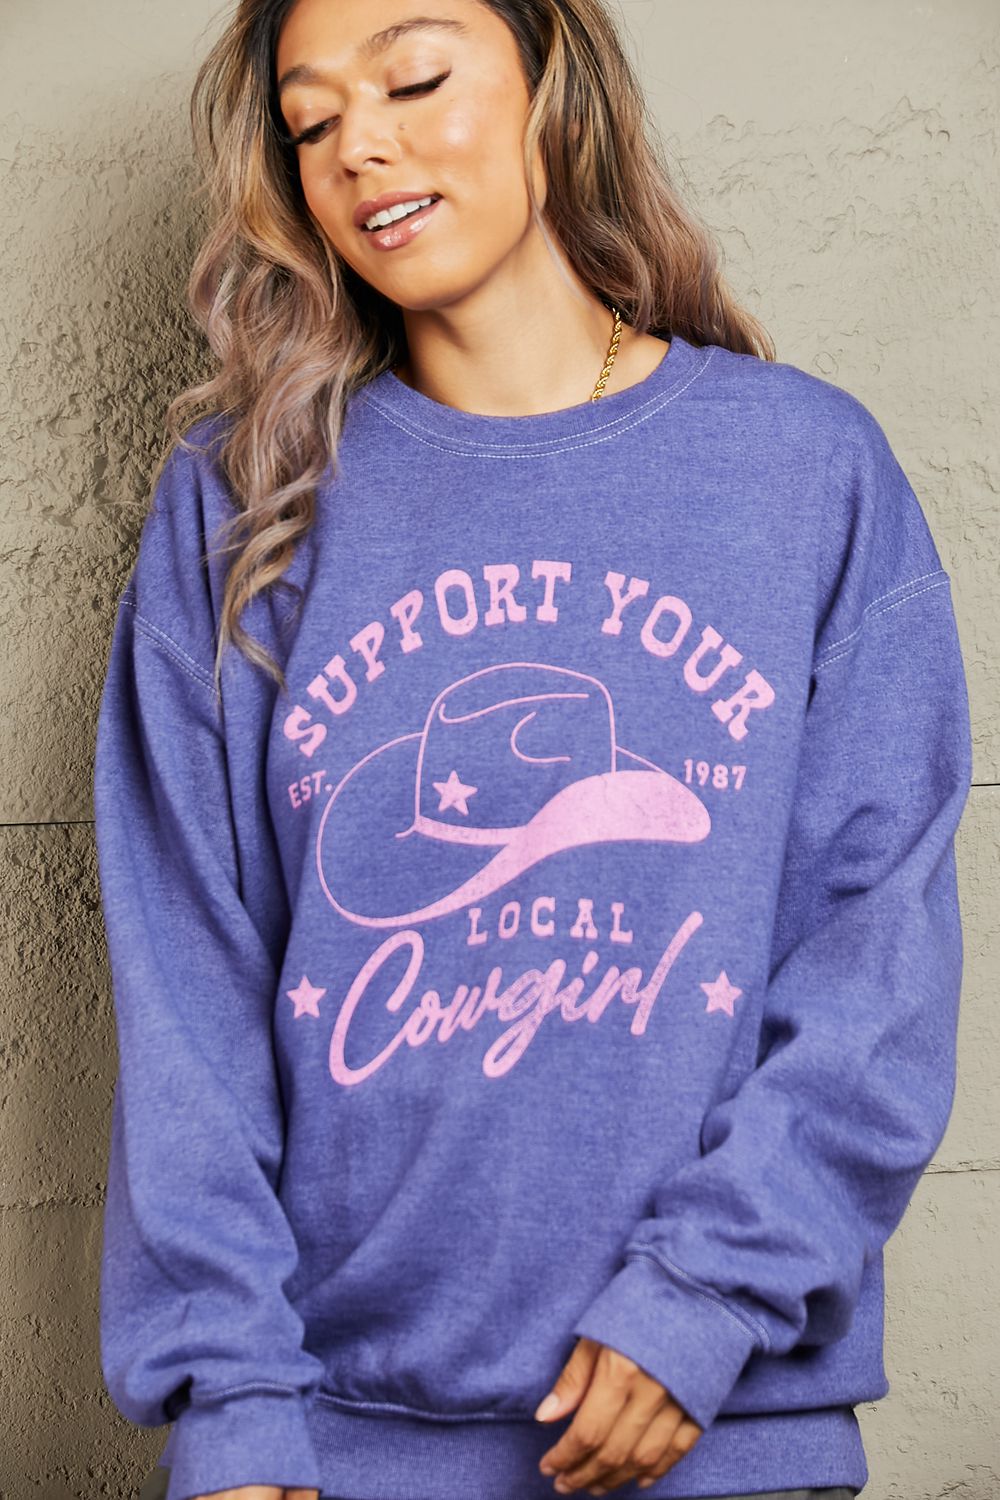 Sweet Claire "Support Your Local Cowgirl" Oversized Crewneck Sweatshirt - pvmark